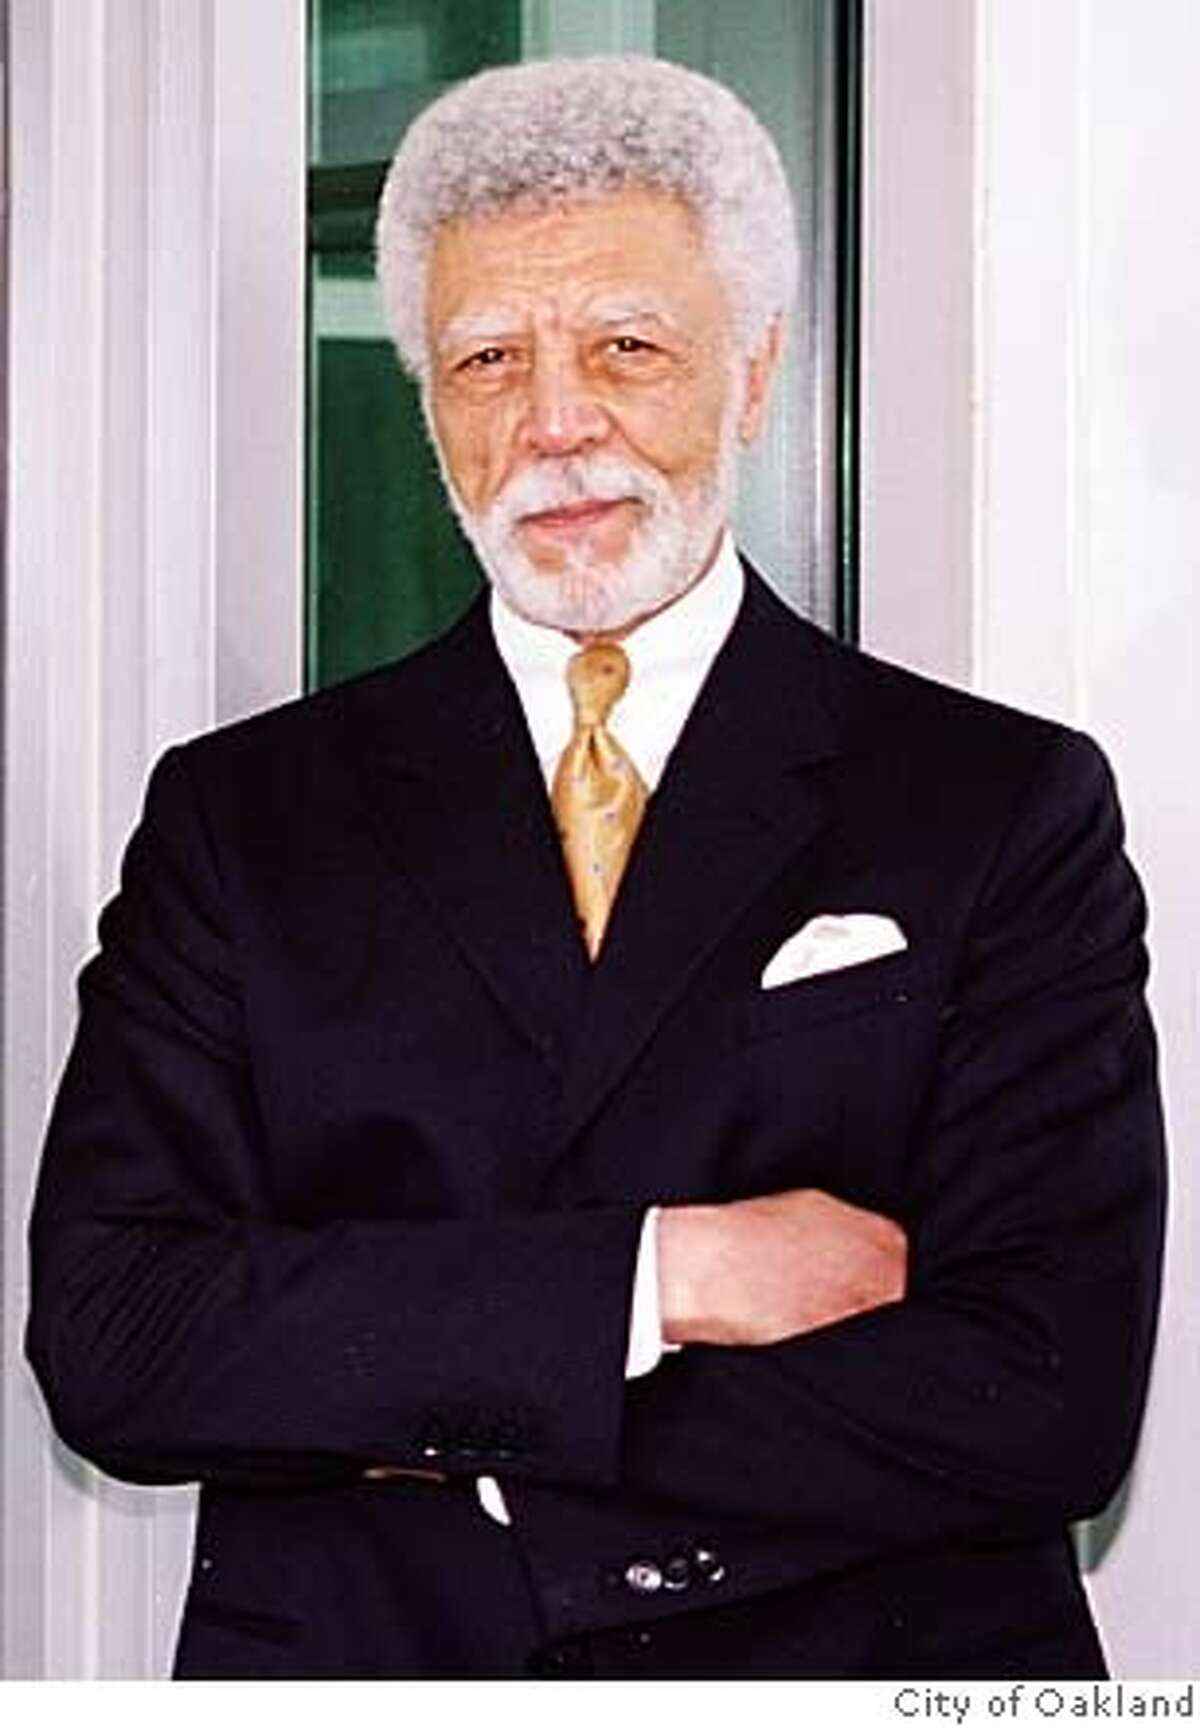 Ron Dellums Photo: City of Oakland